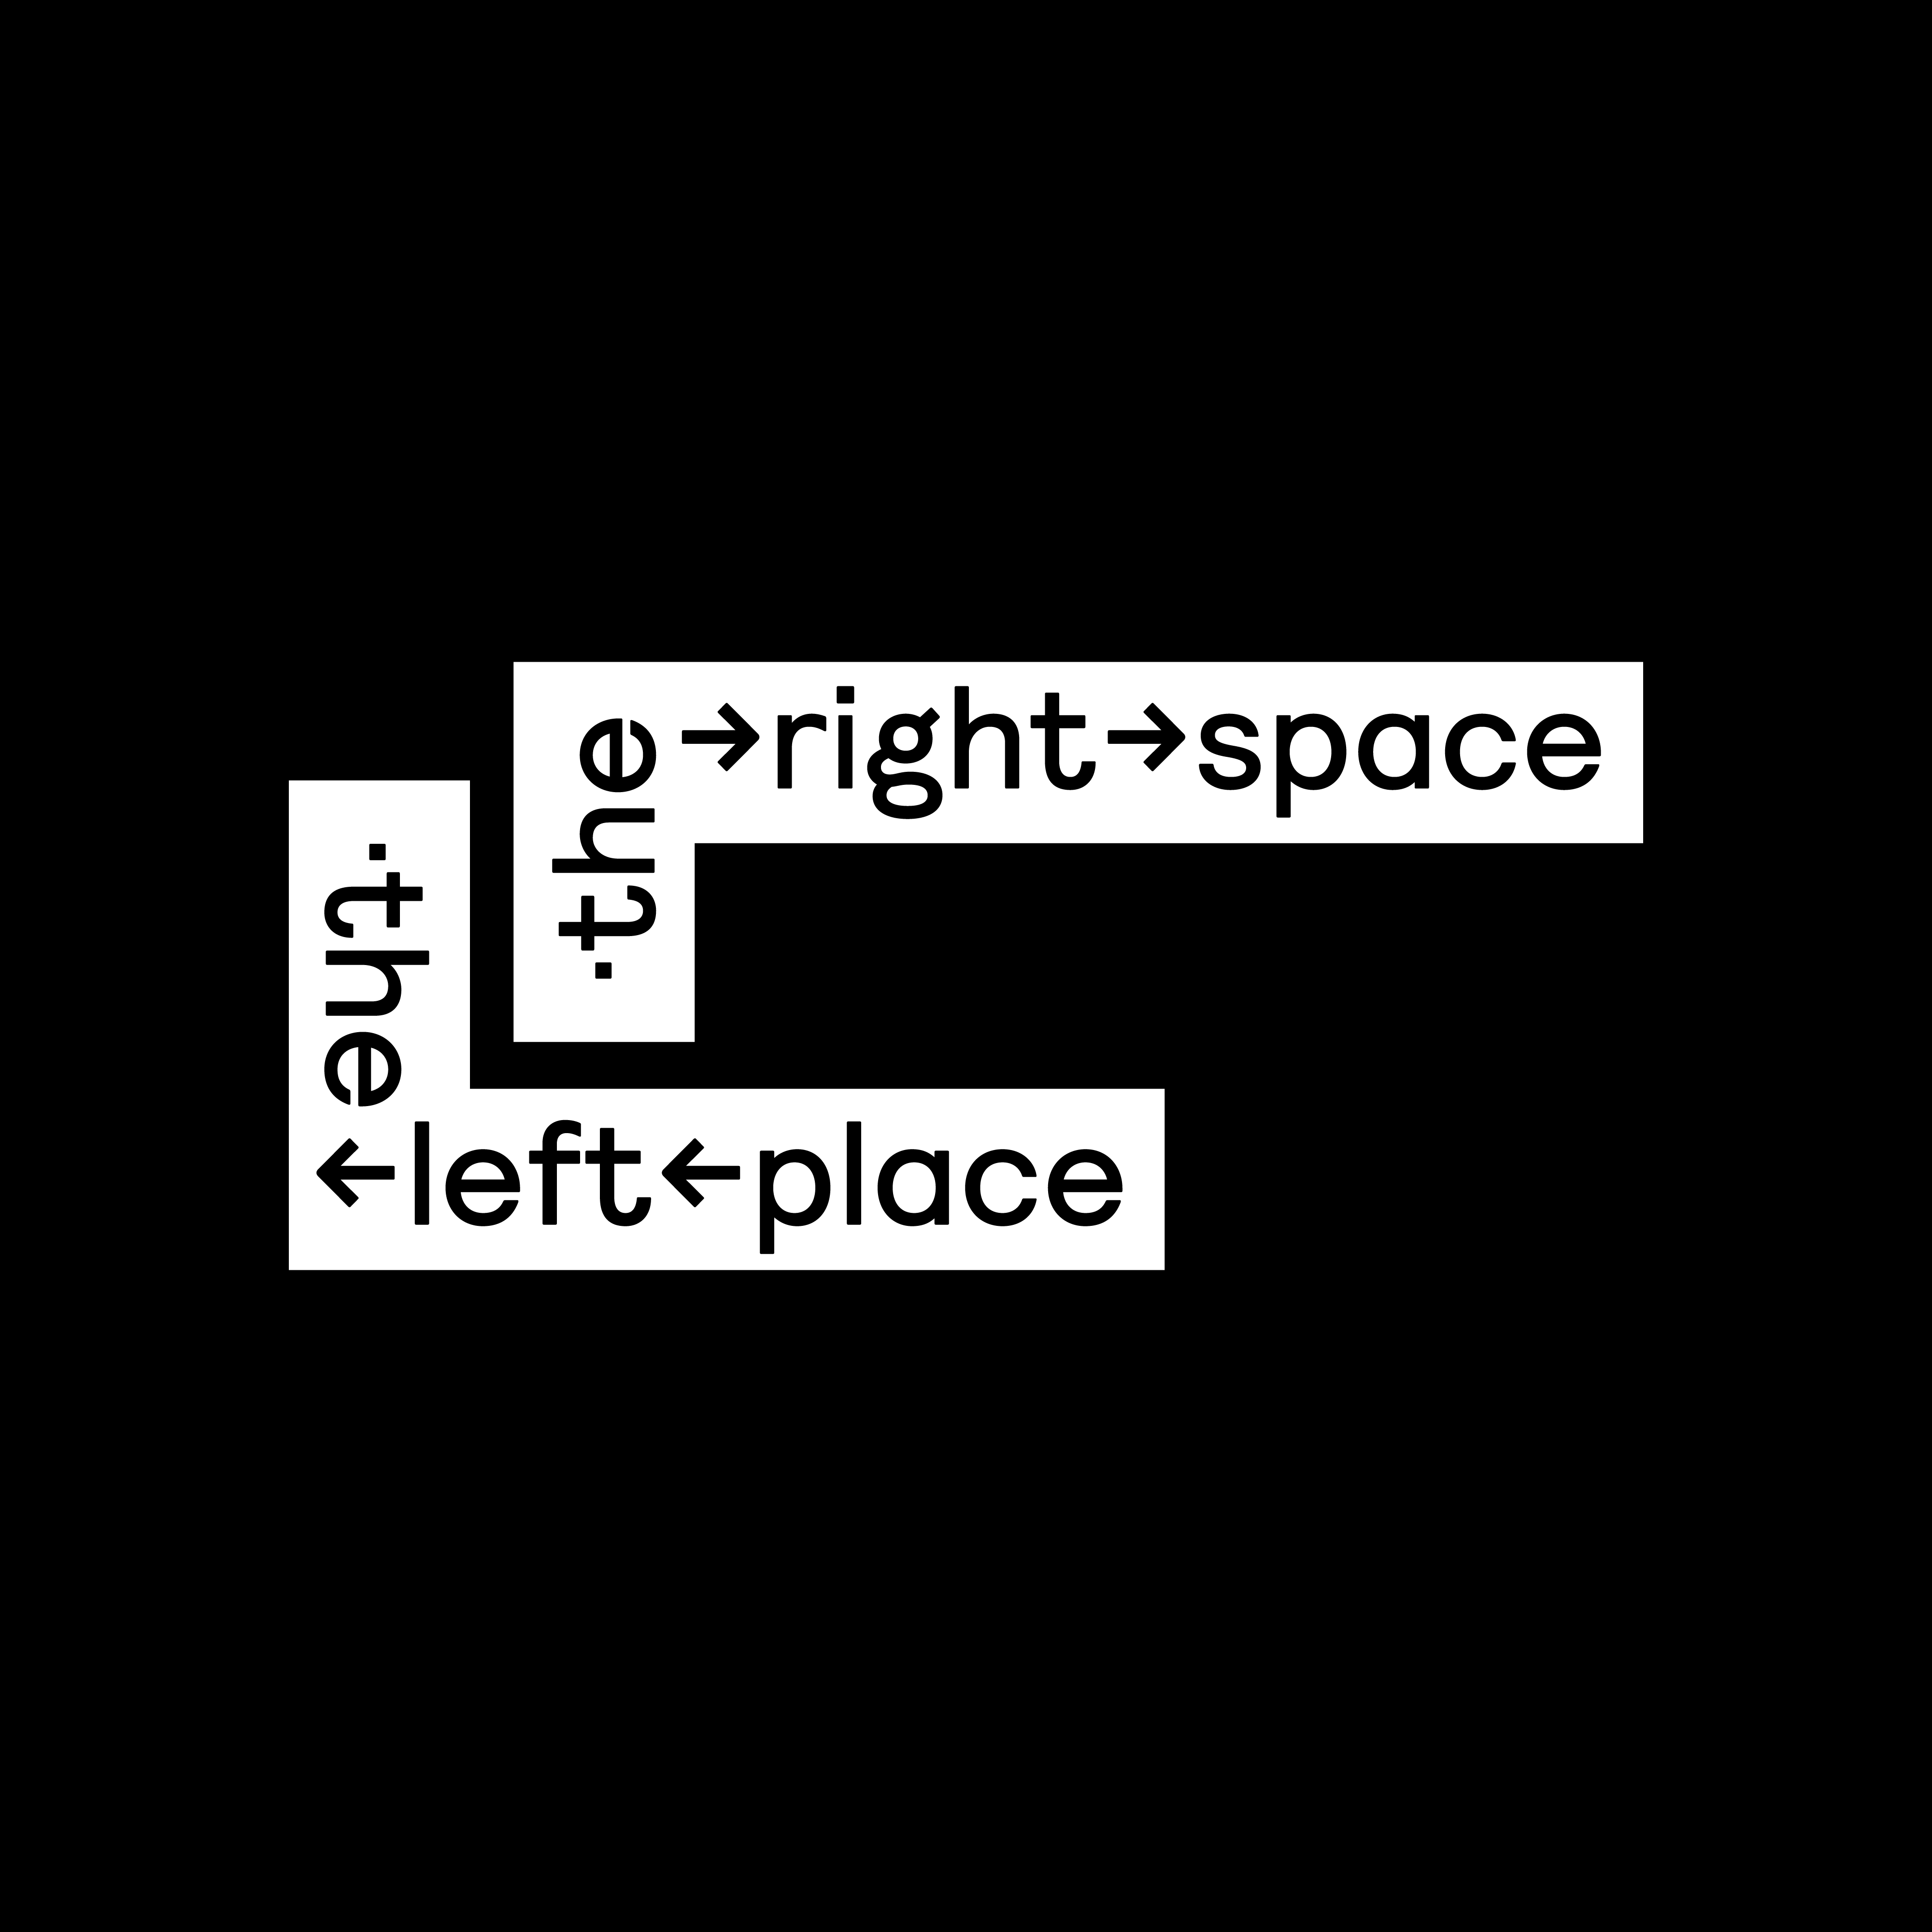 The left place the right space